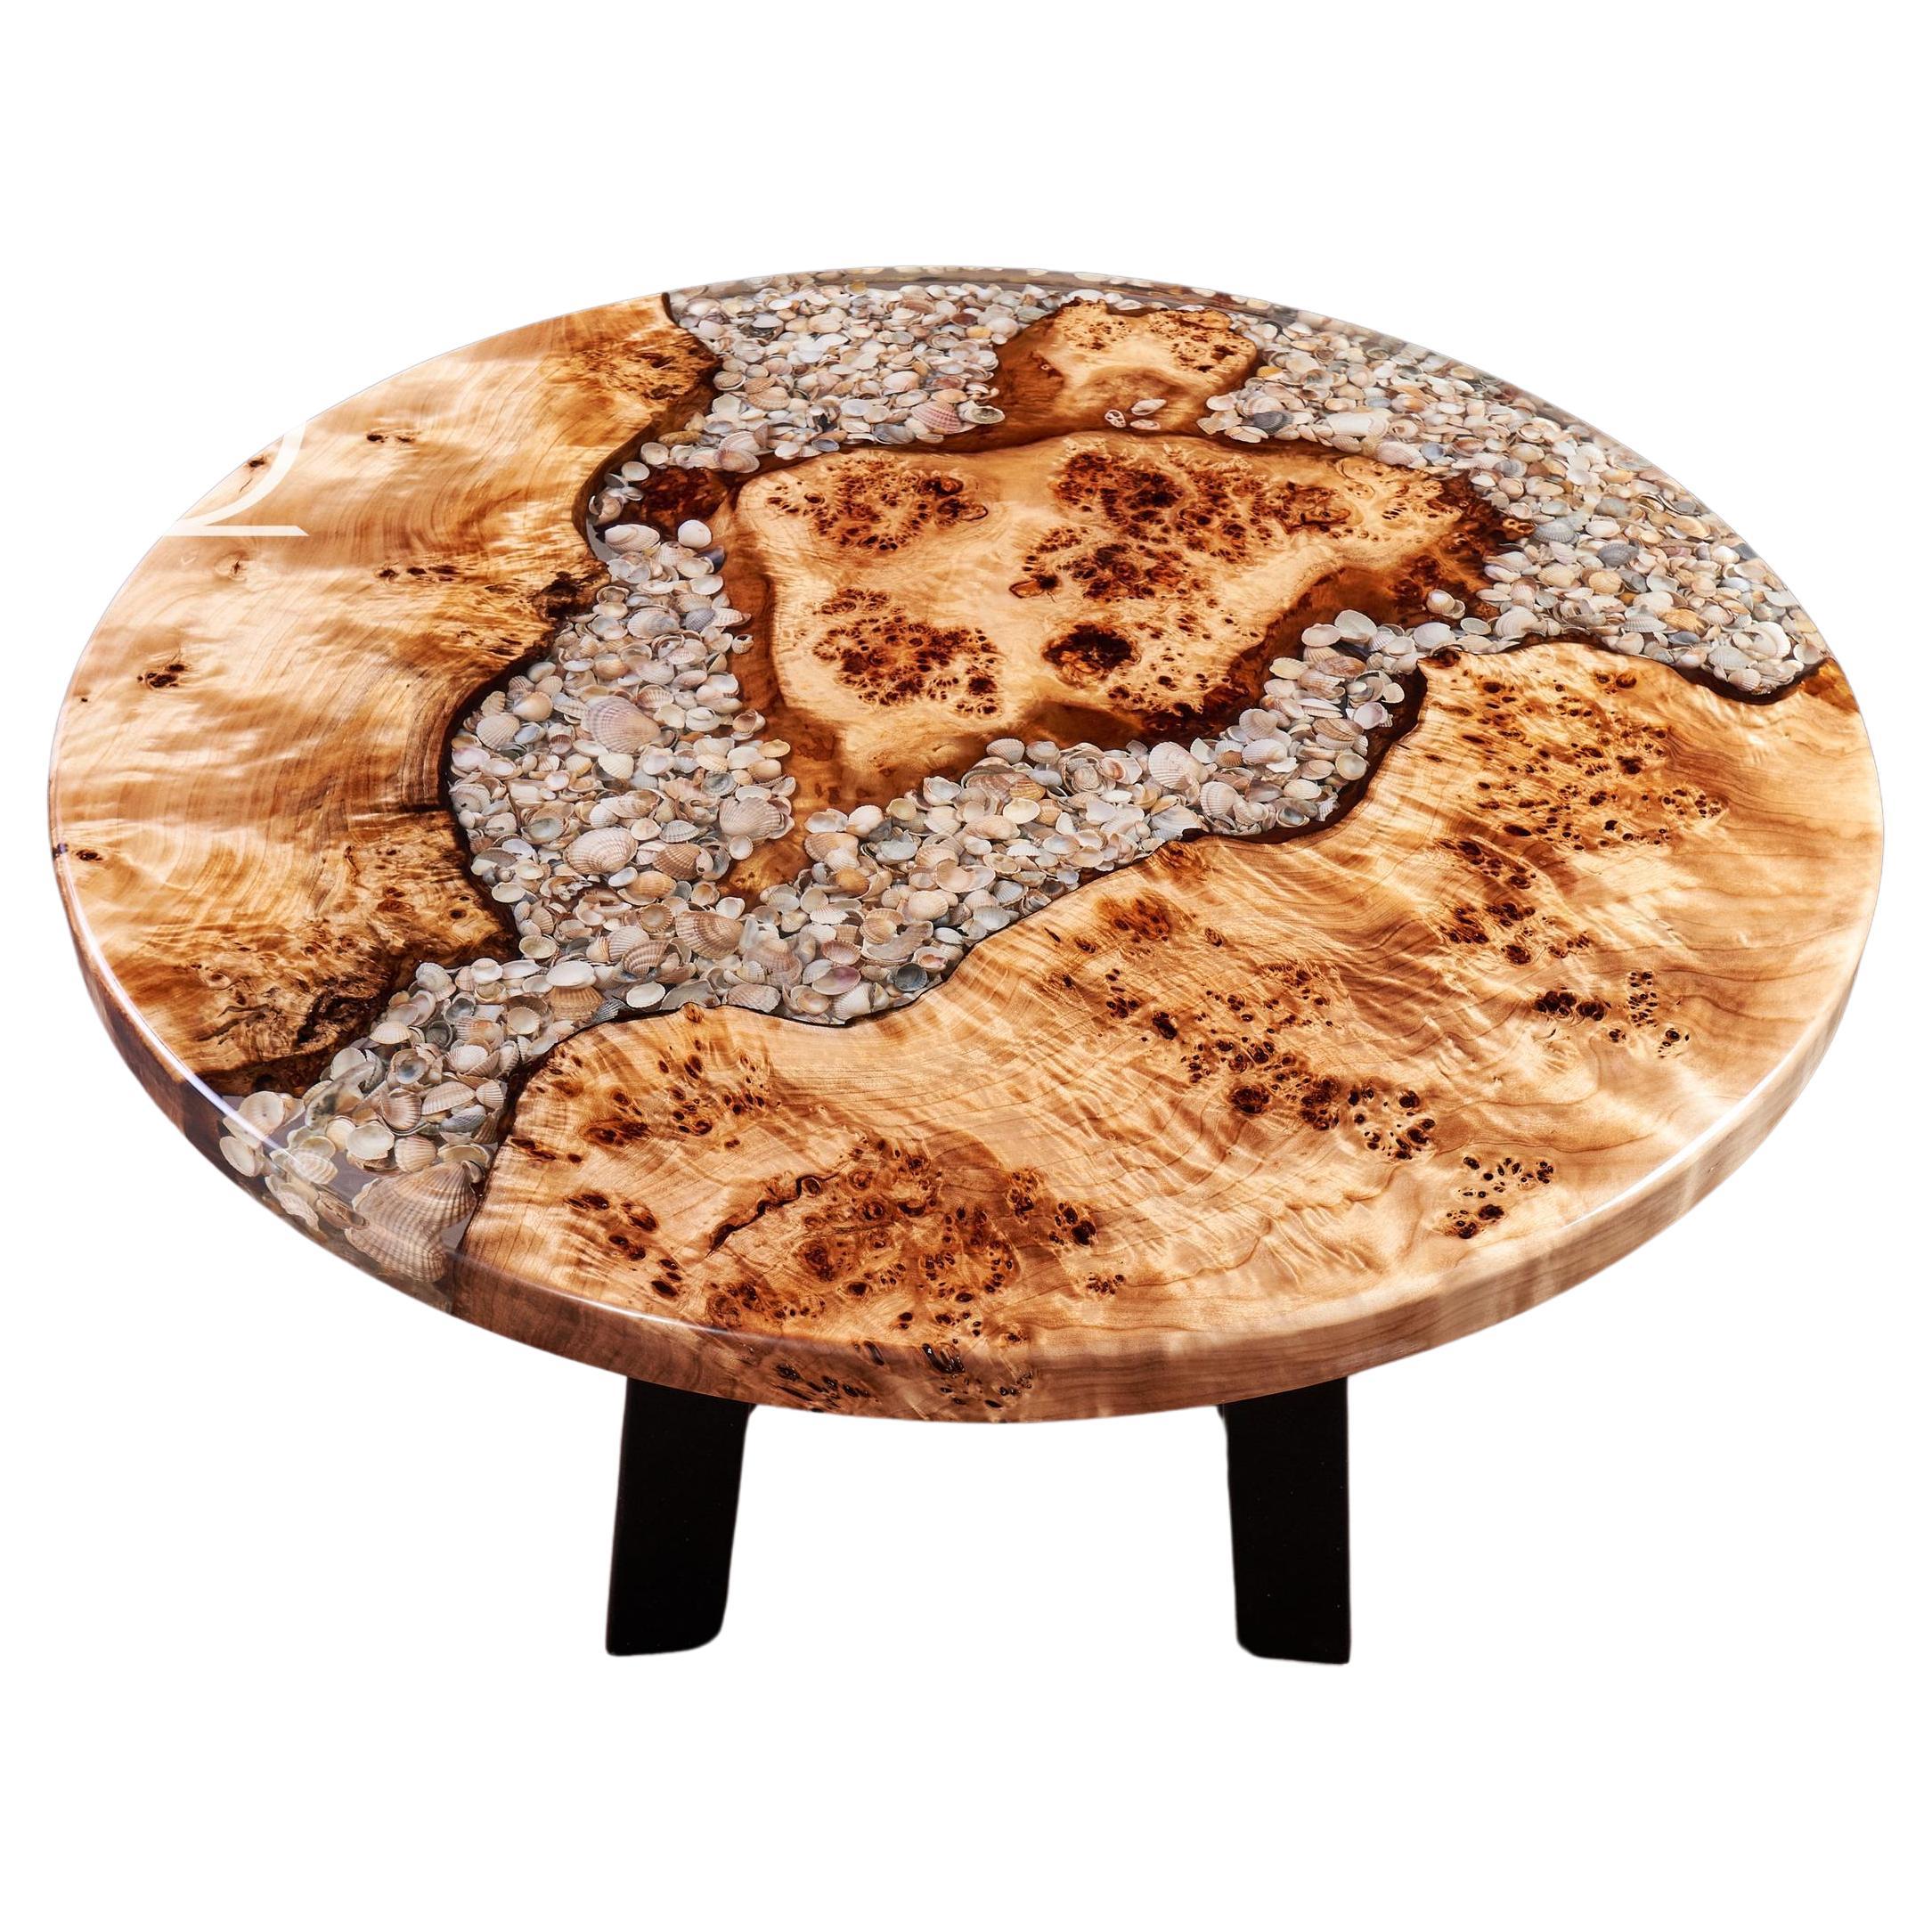 What is a burl in wood?